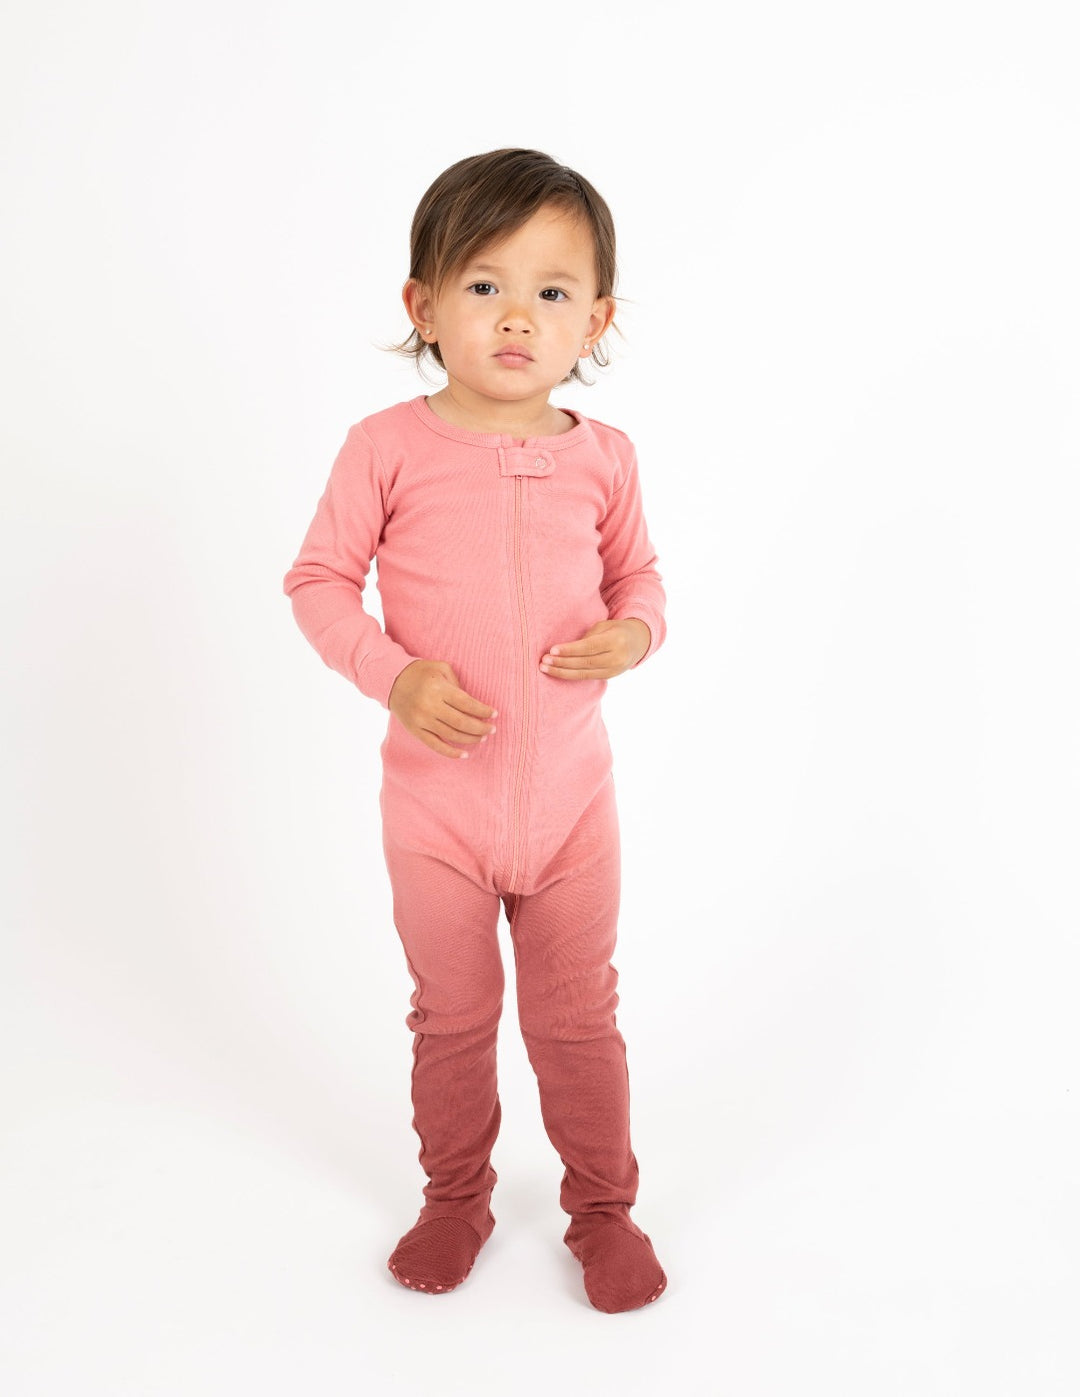 Kids Footed Pink Ombré Tie Dye Cotton Pajamas